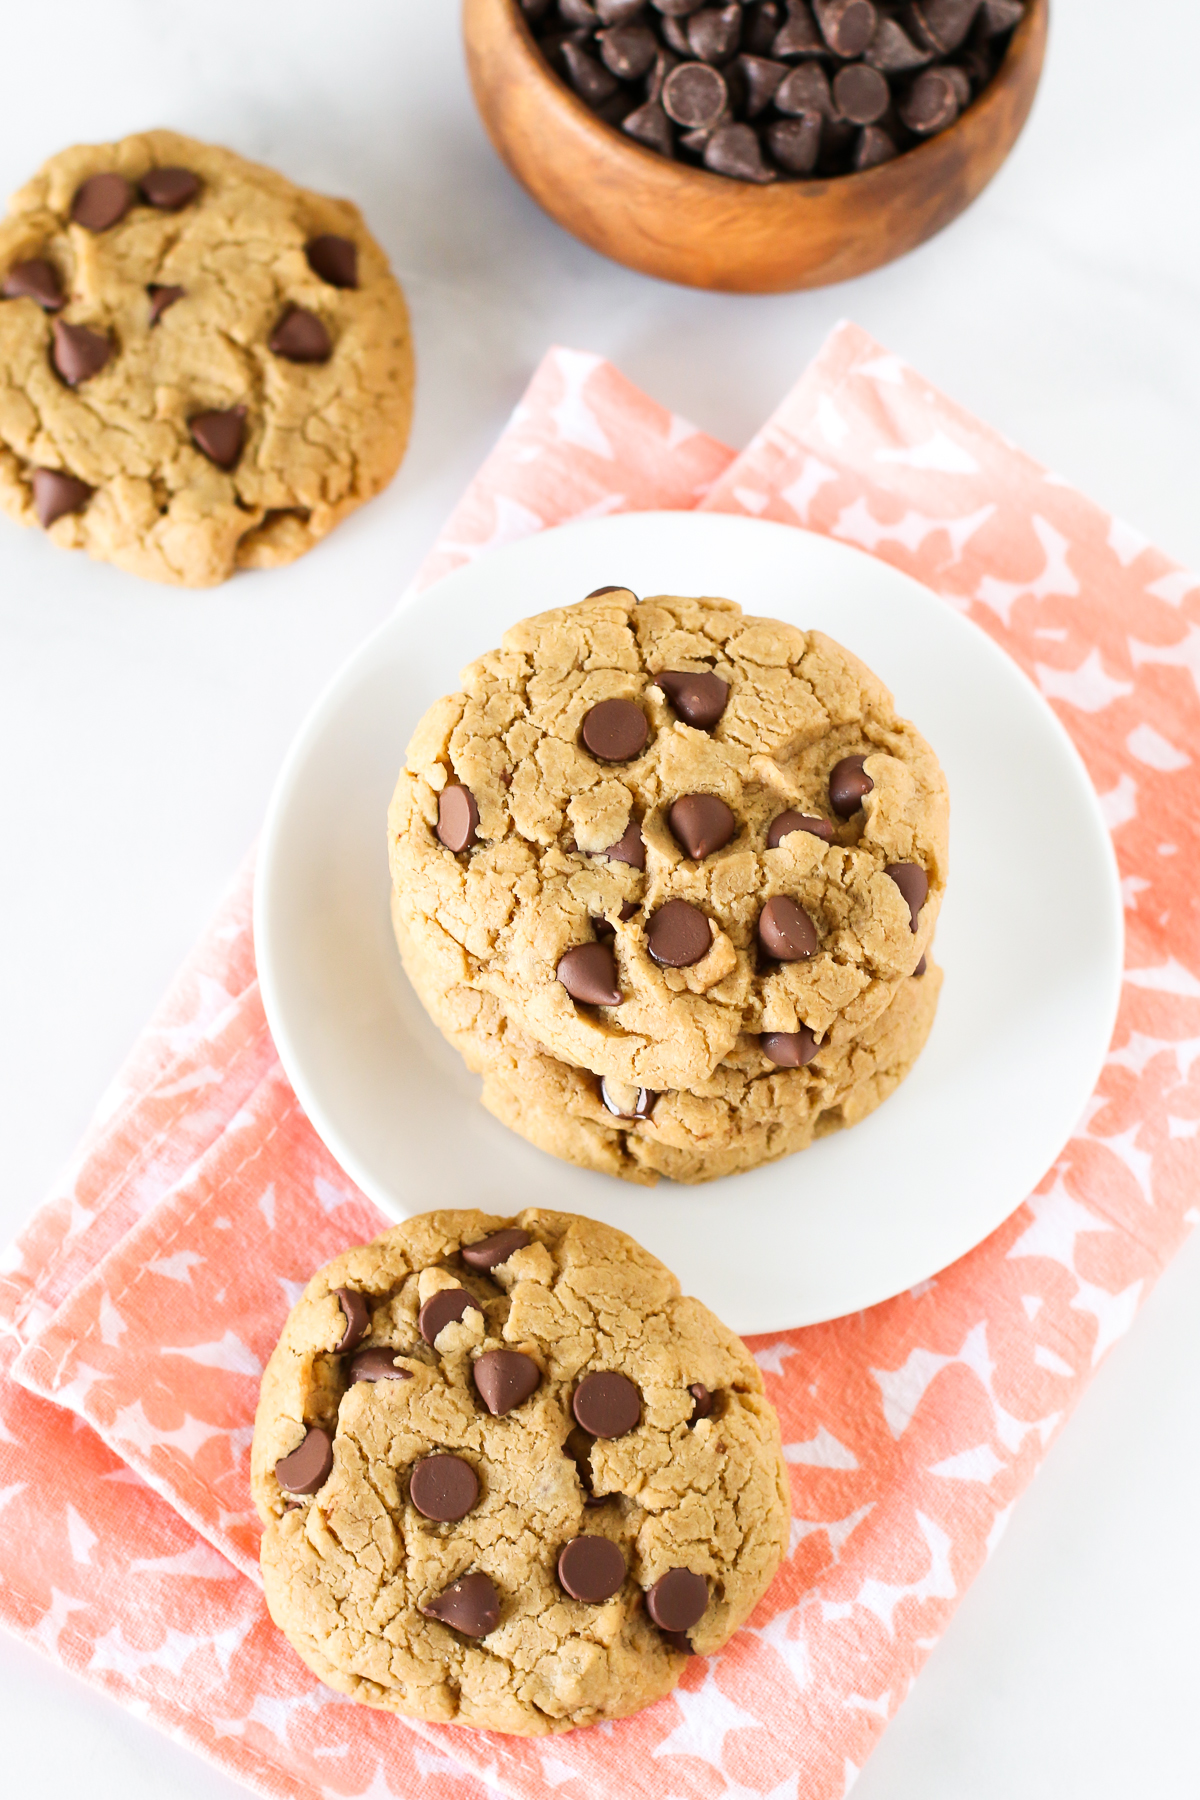 Gluten Free Vegan Peanut Butter Chocolate Chip Cookies. For all of you PB and chocolate lovers out there, these cookies are for you!